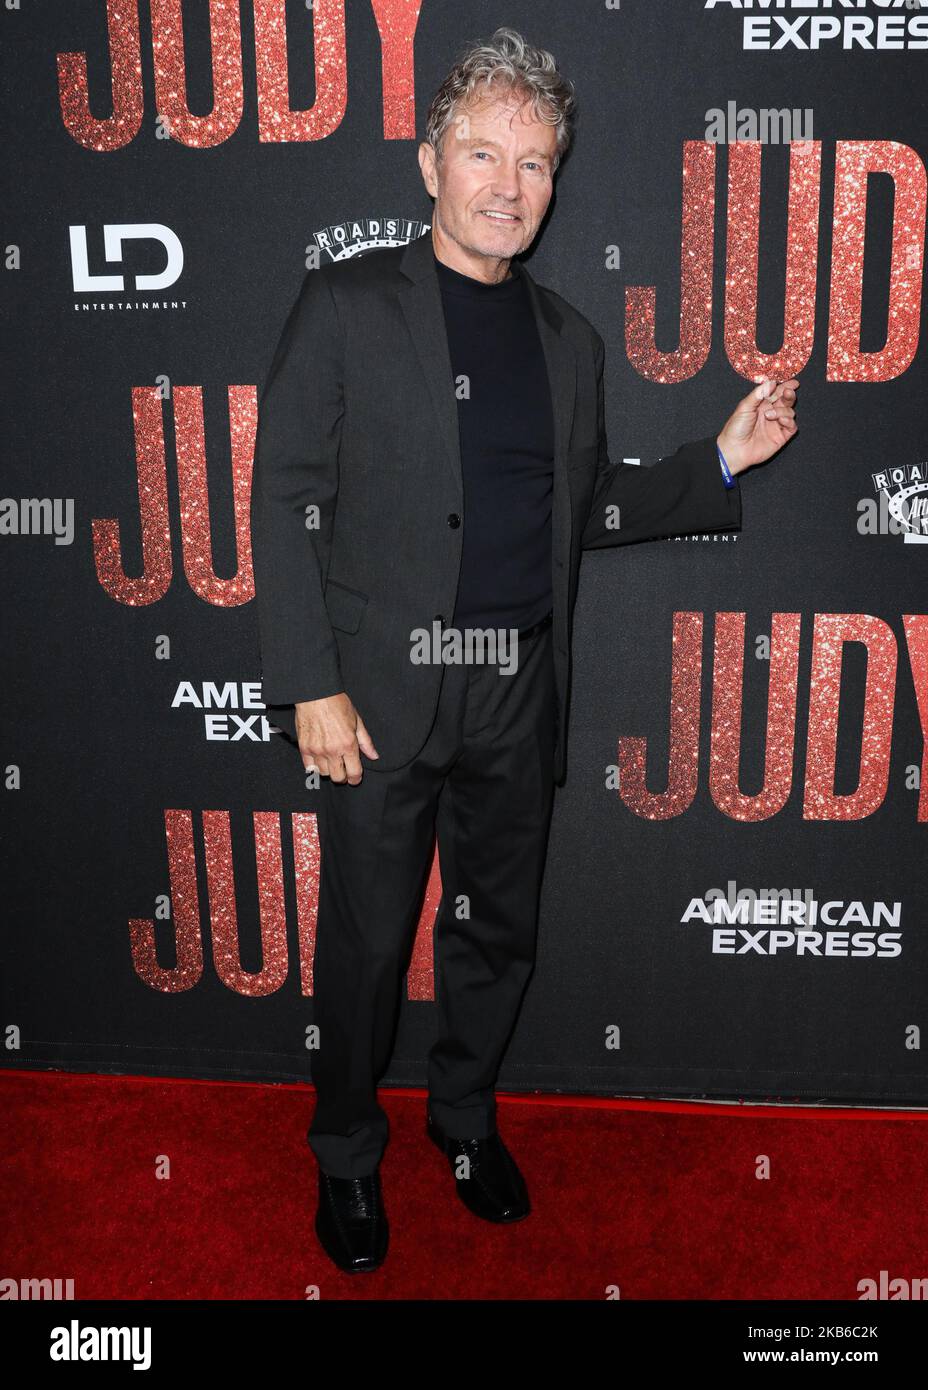 BEVERLY HILLS, LOS ANGELES, CALIFORNIA, USA - SEPTEMBER 19: John Savage arrives at the Premiere Of Roadside Attraction's 'Judy' held at the Samuel Goldwyn Theater at the Academy of Motion Picture Arts and Sciences on September 19, 2019 in Beverly Hills, Los Angeles, California, United States. (Photo by David Acosta/Image Press Agency/NurPhoto) Stock Photo